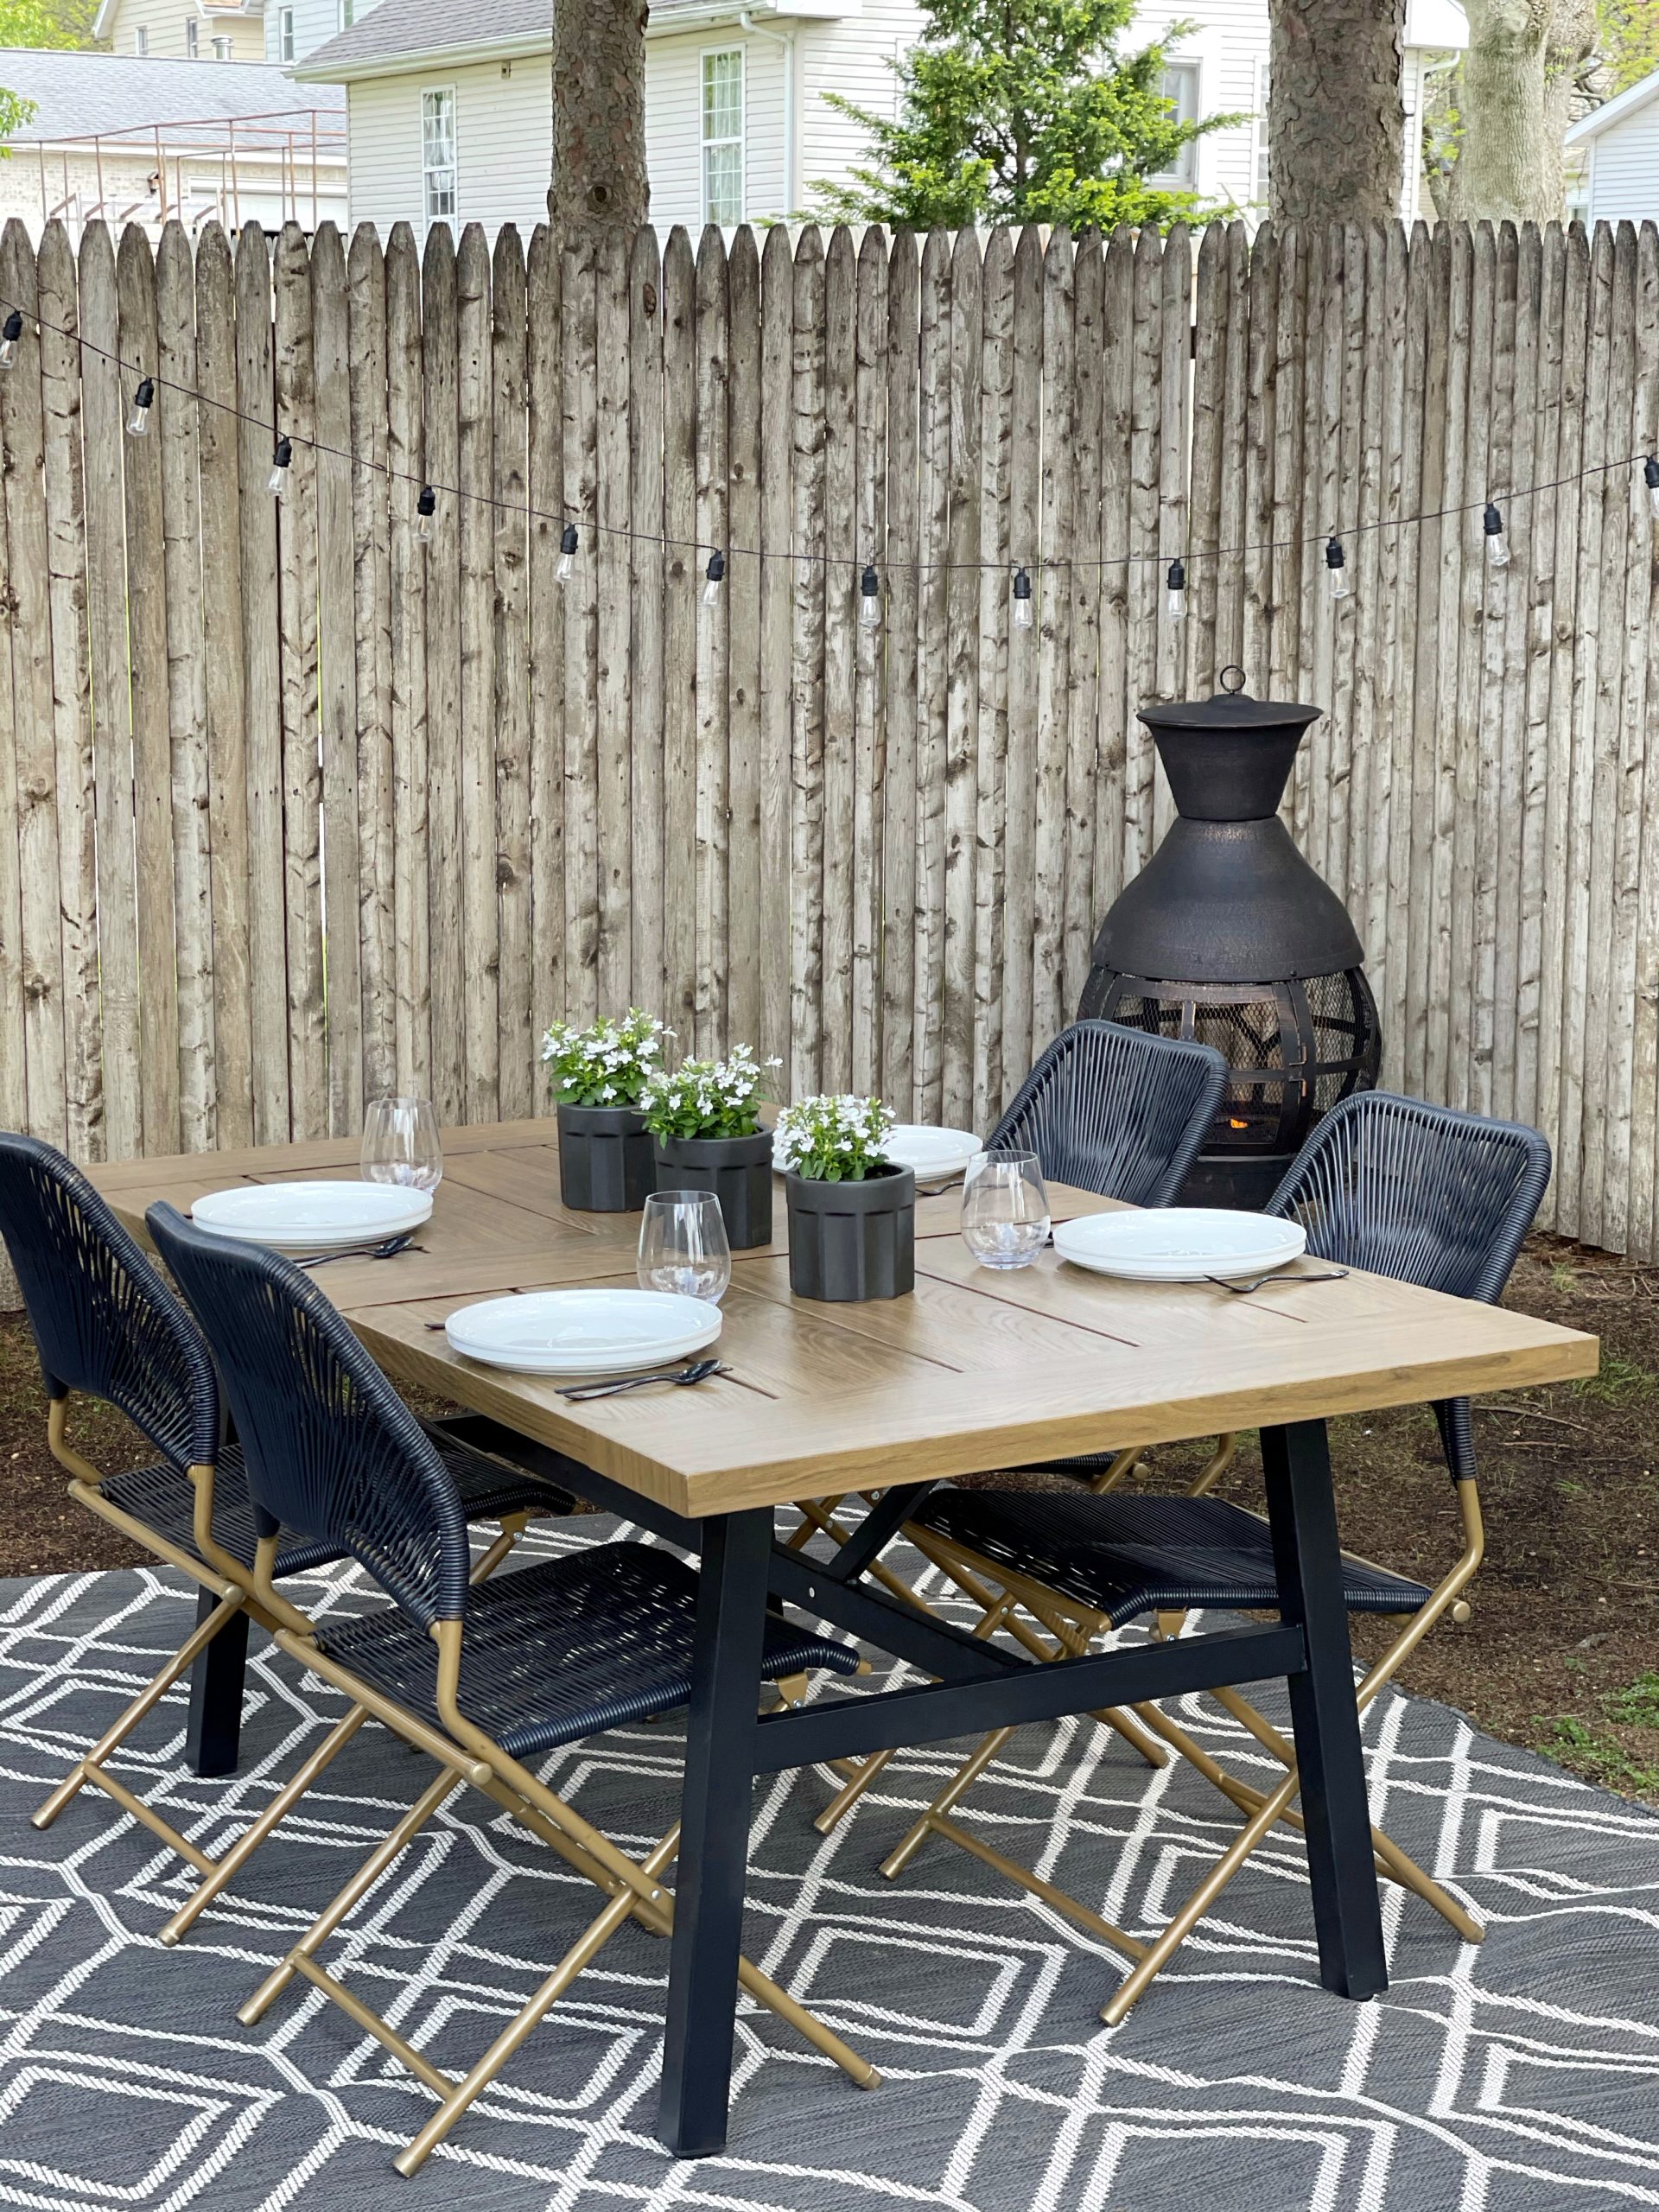 How to create an Outdoor Dining Space